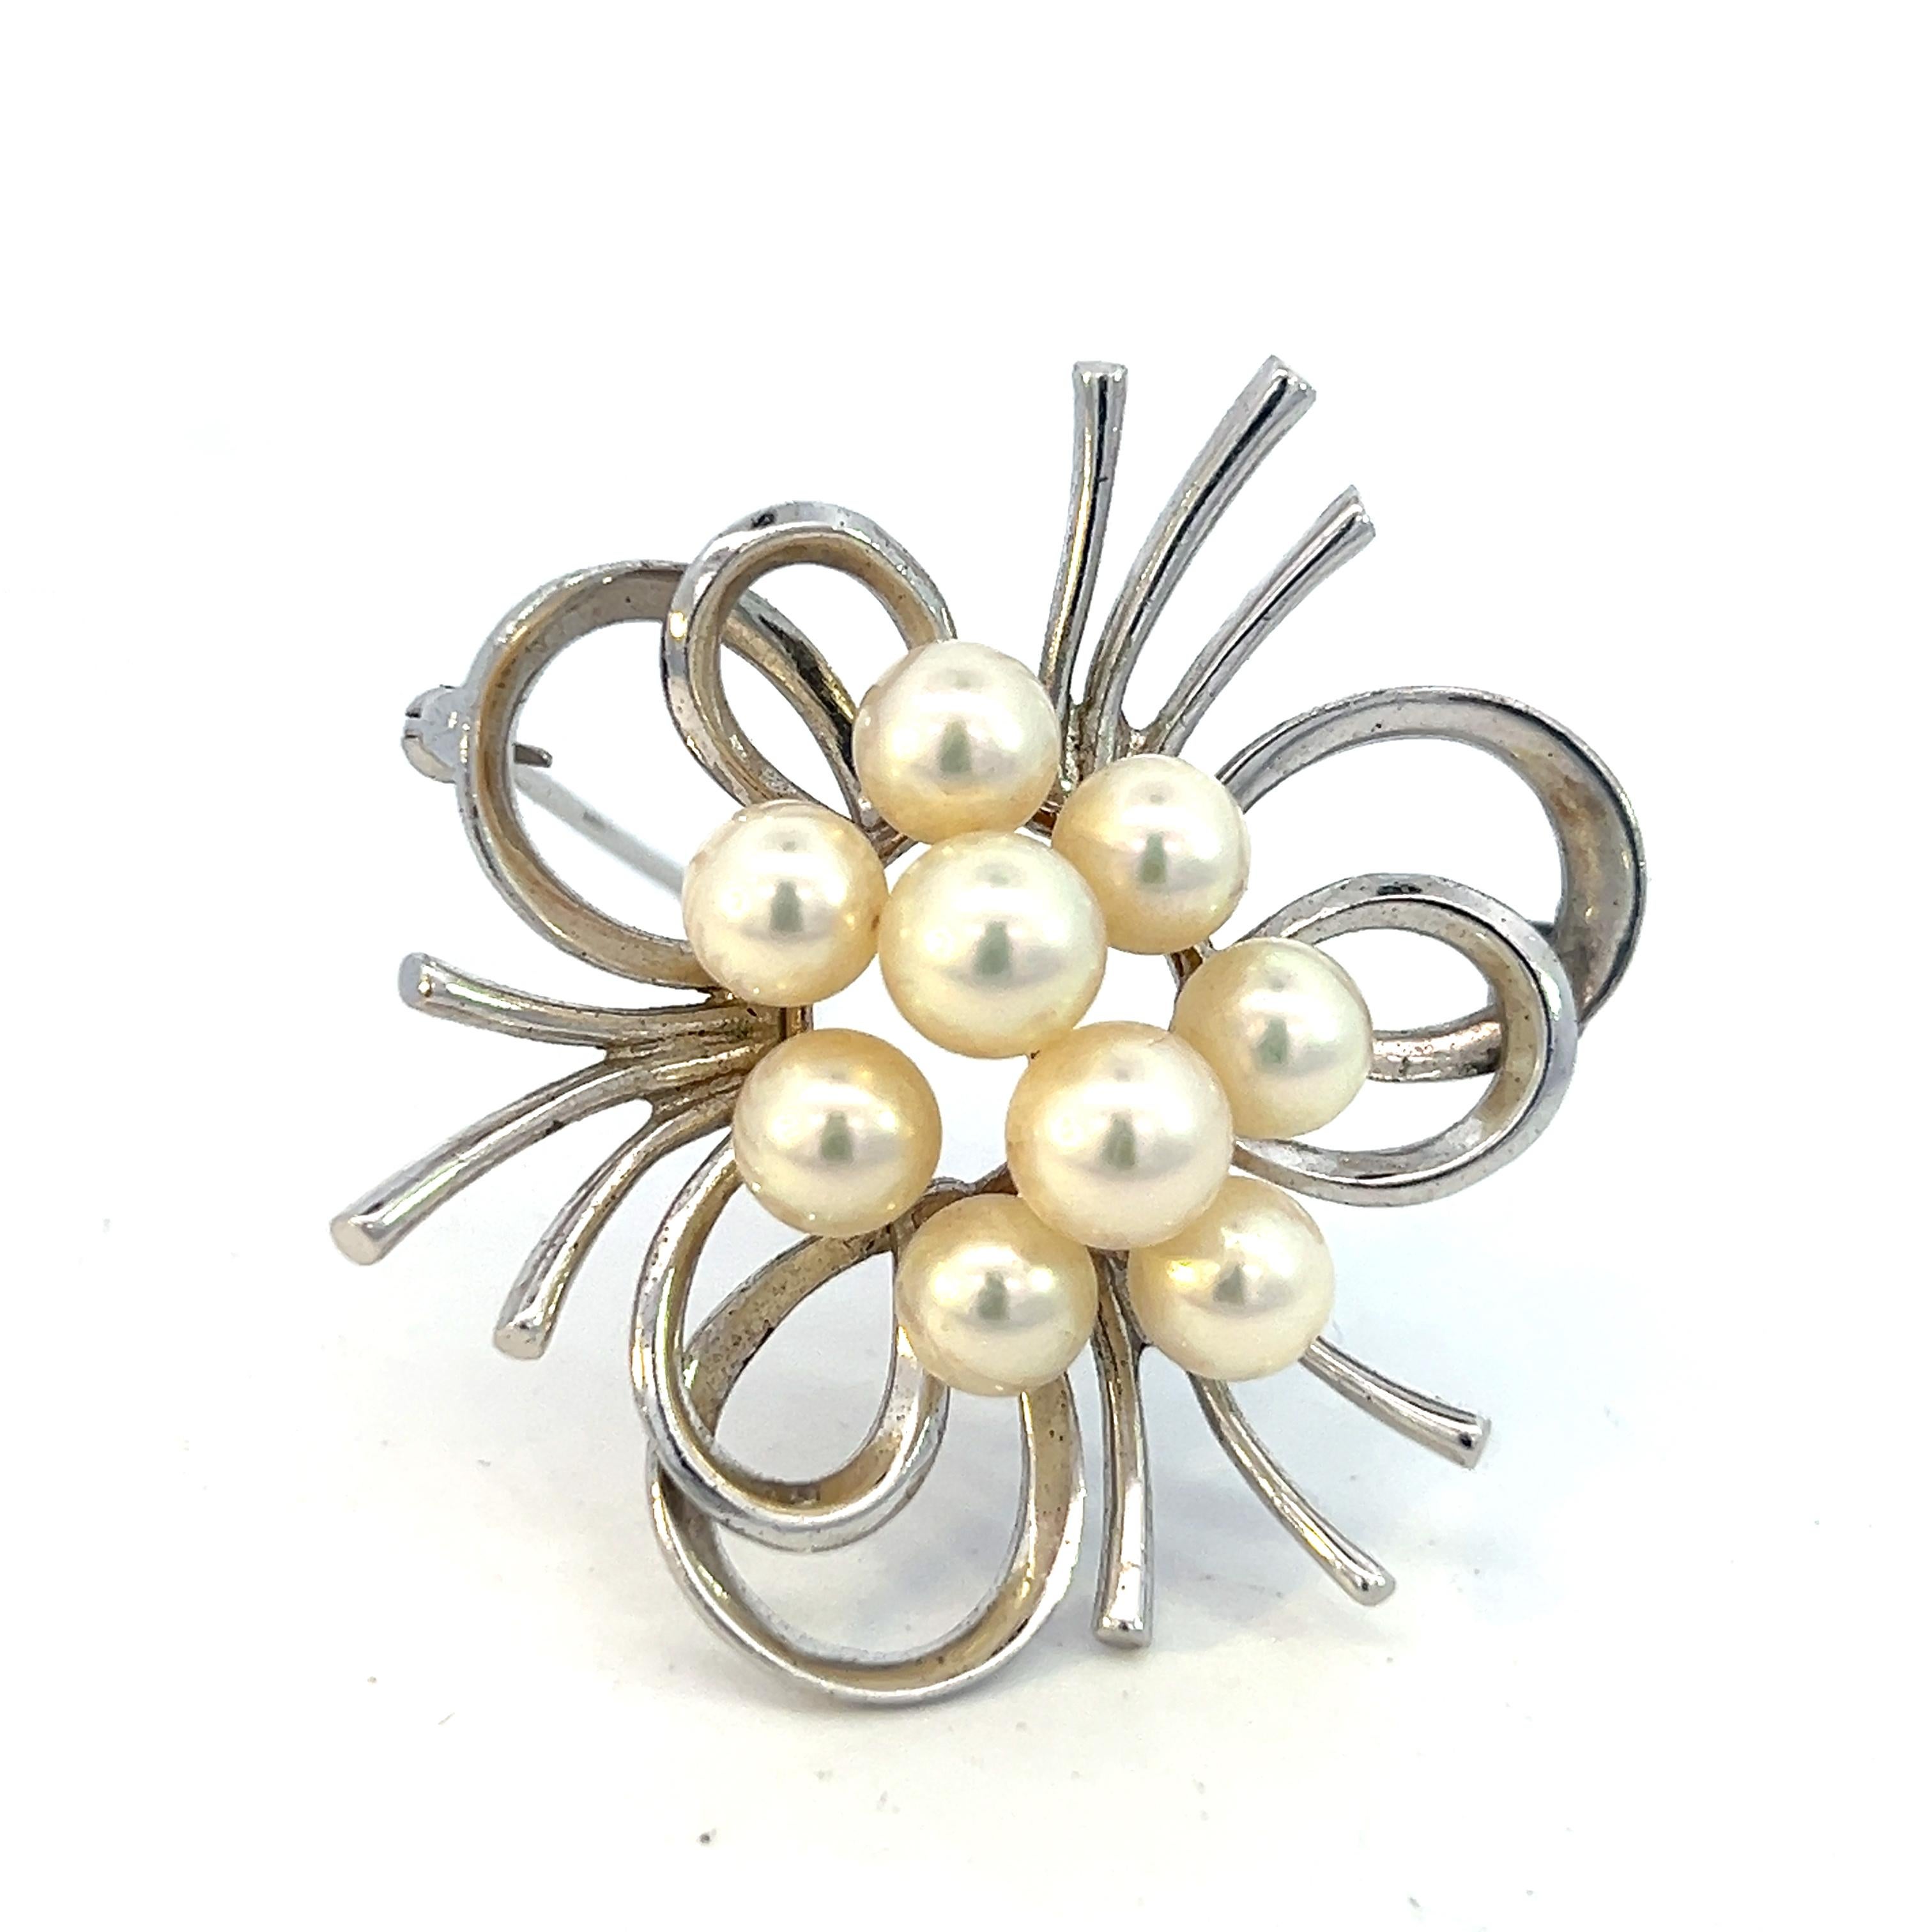 Mikimoto Estate Akoya Pearl Brooch Silver 6 mm 9.5 Grams In Good Condition For Sale In Brooklyn, NY